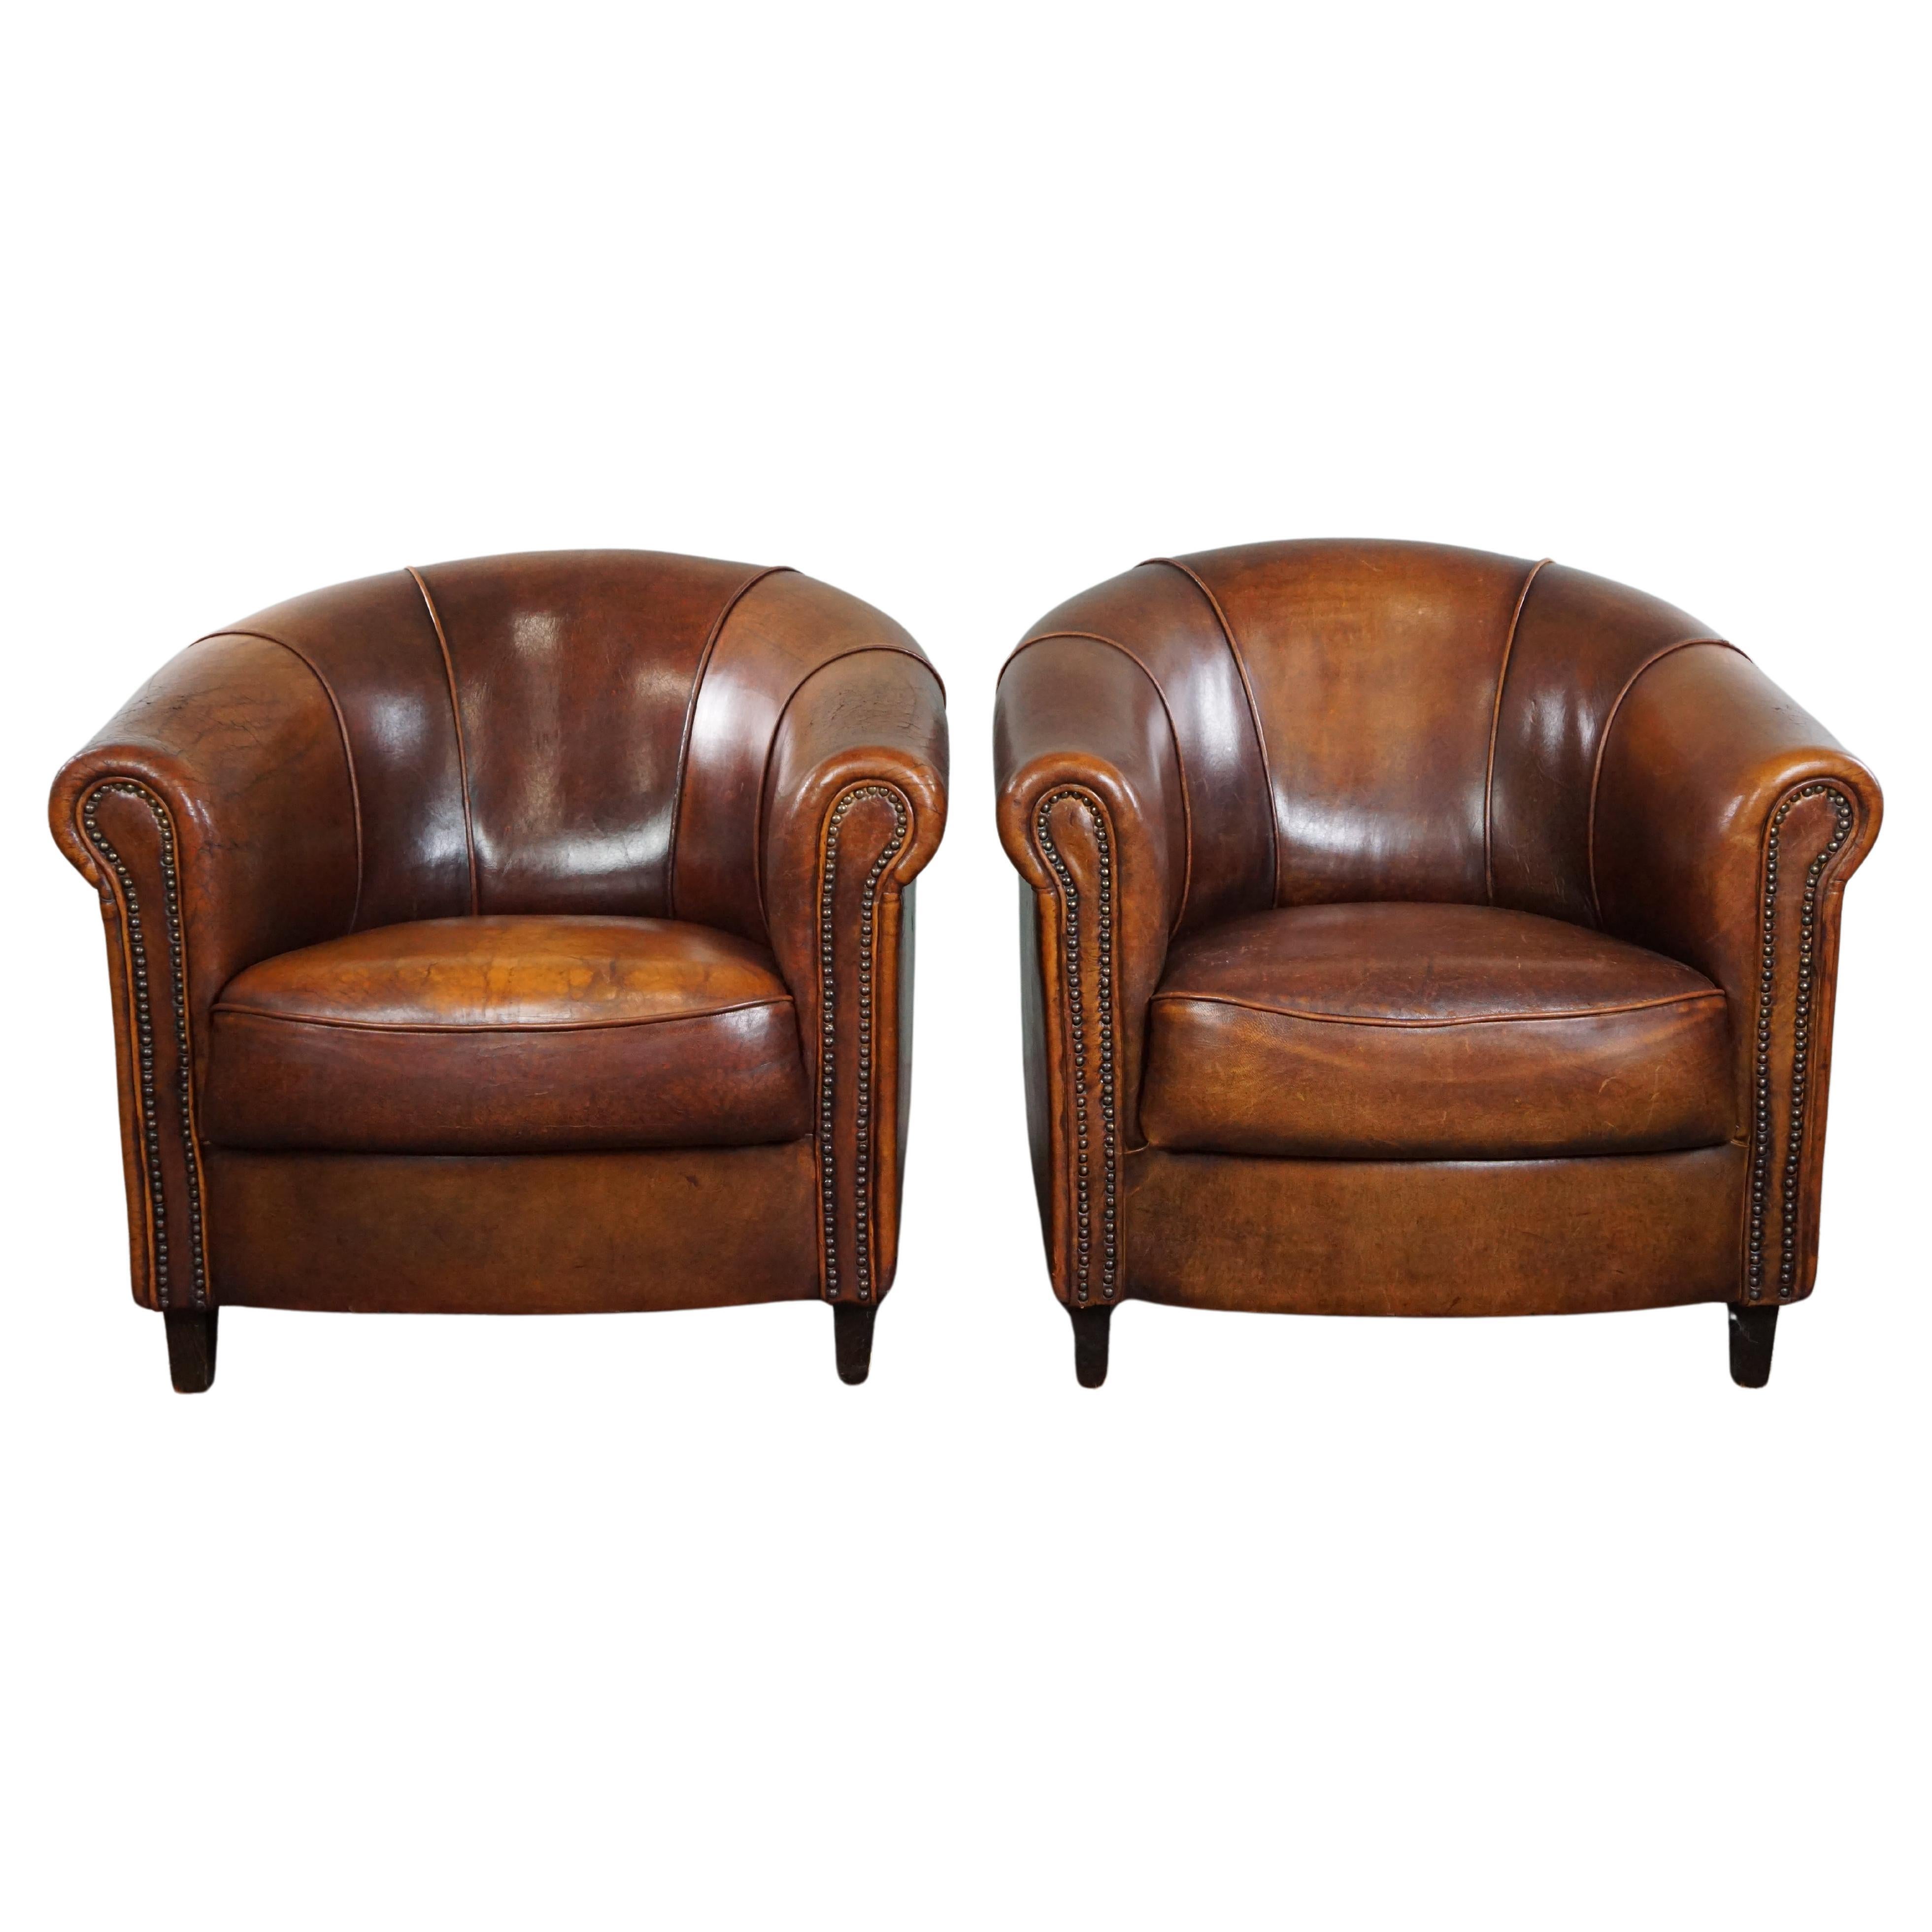 Set of two club armchairs made of sheep leather in a beautiful warm dark color For Sale